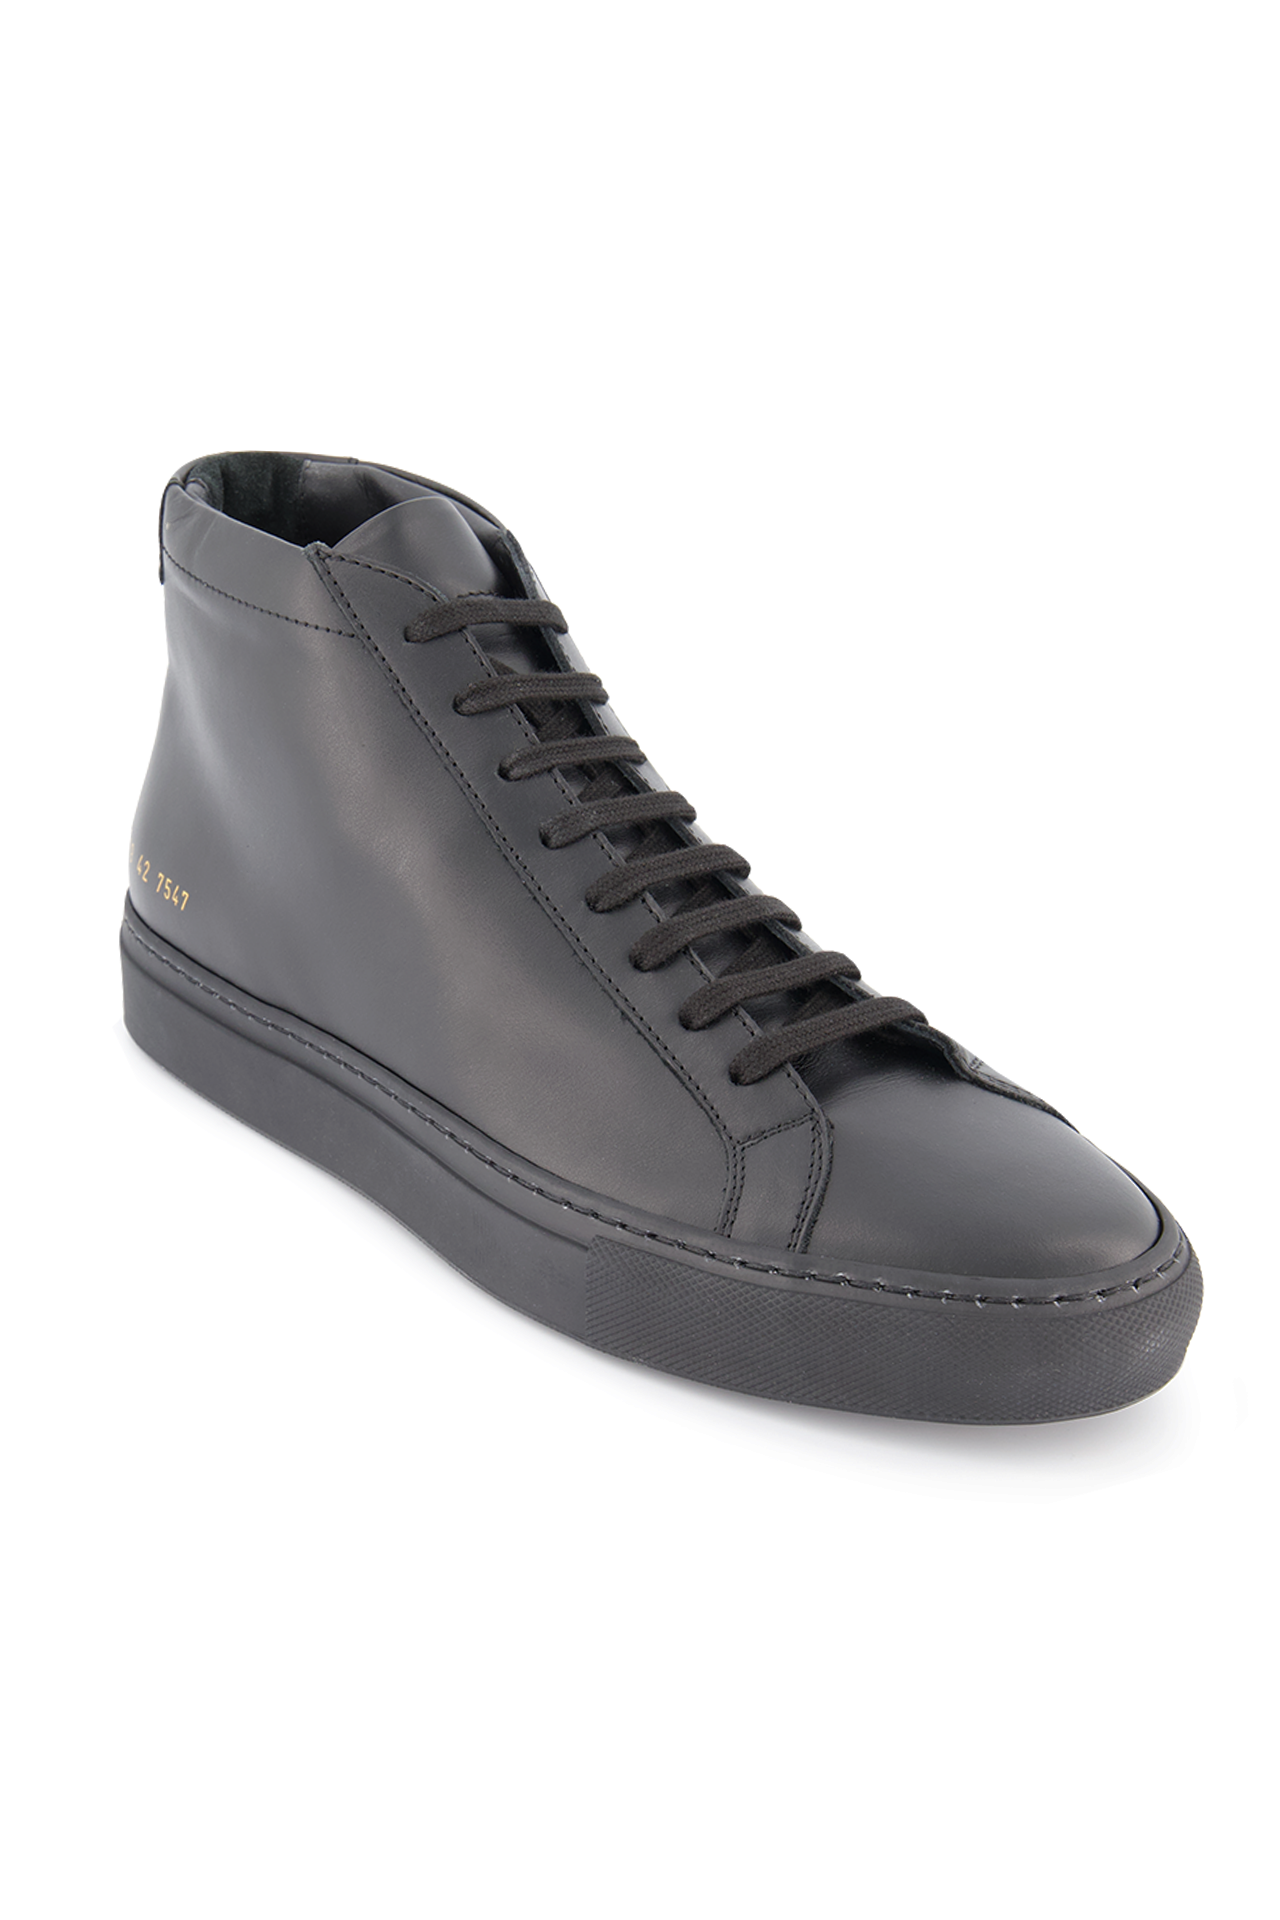 COMMON PROJECTS Original Achilles Leather Sneakers for Men